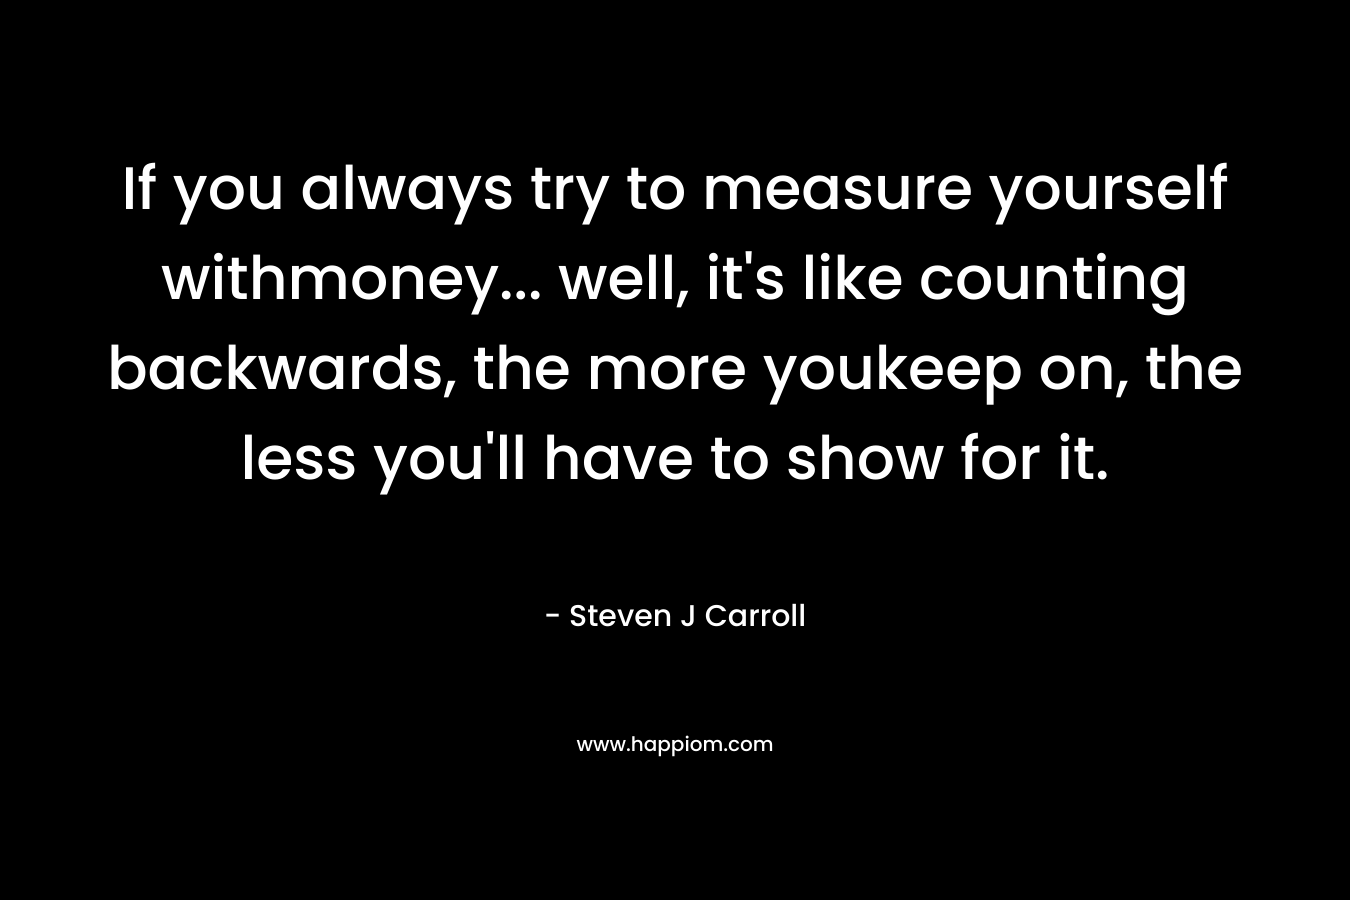 If you always try to measure yourself withmoney... well, it's like counting backwards, the more youkeep on, the less you'll have to show for it.